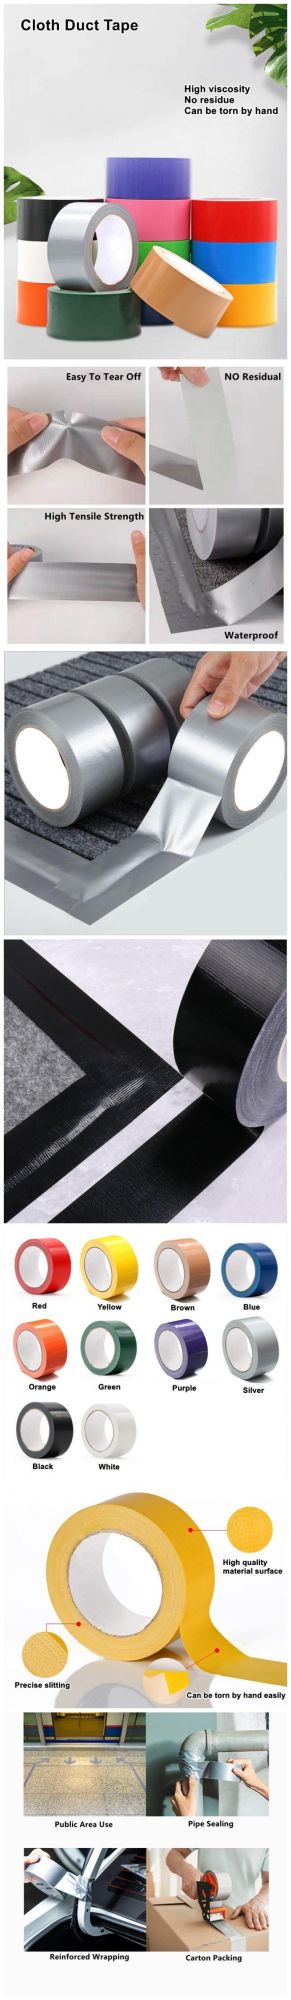 Waterproof Heavy Duty Coloured Rubber Adhesive Black Silver Repair Sealing Binding Customized Gaffer Cloth Duct Tape